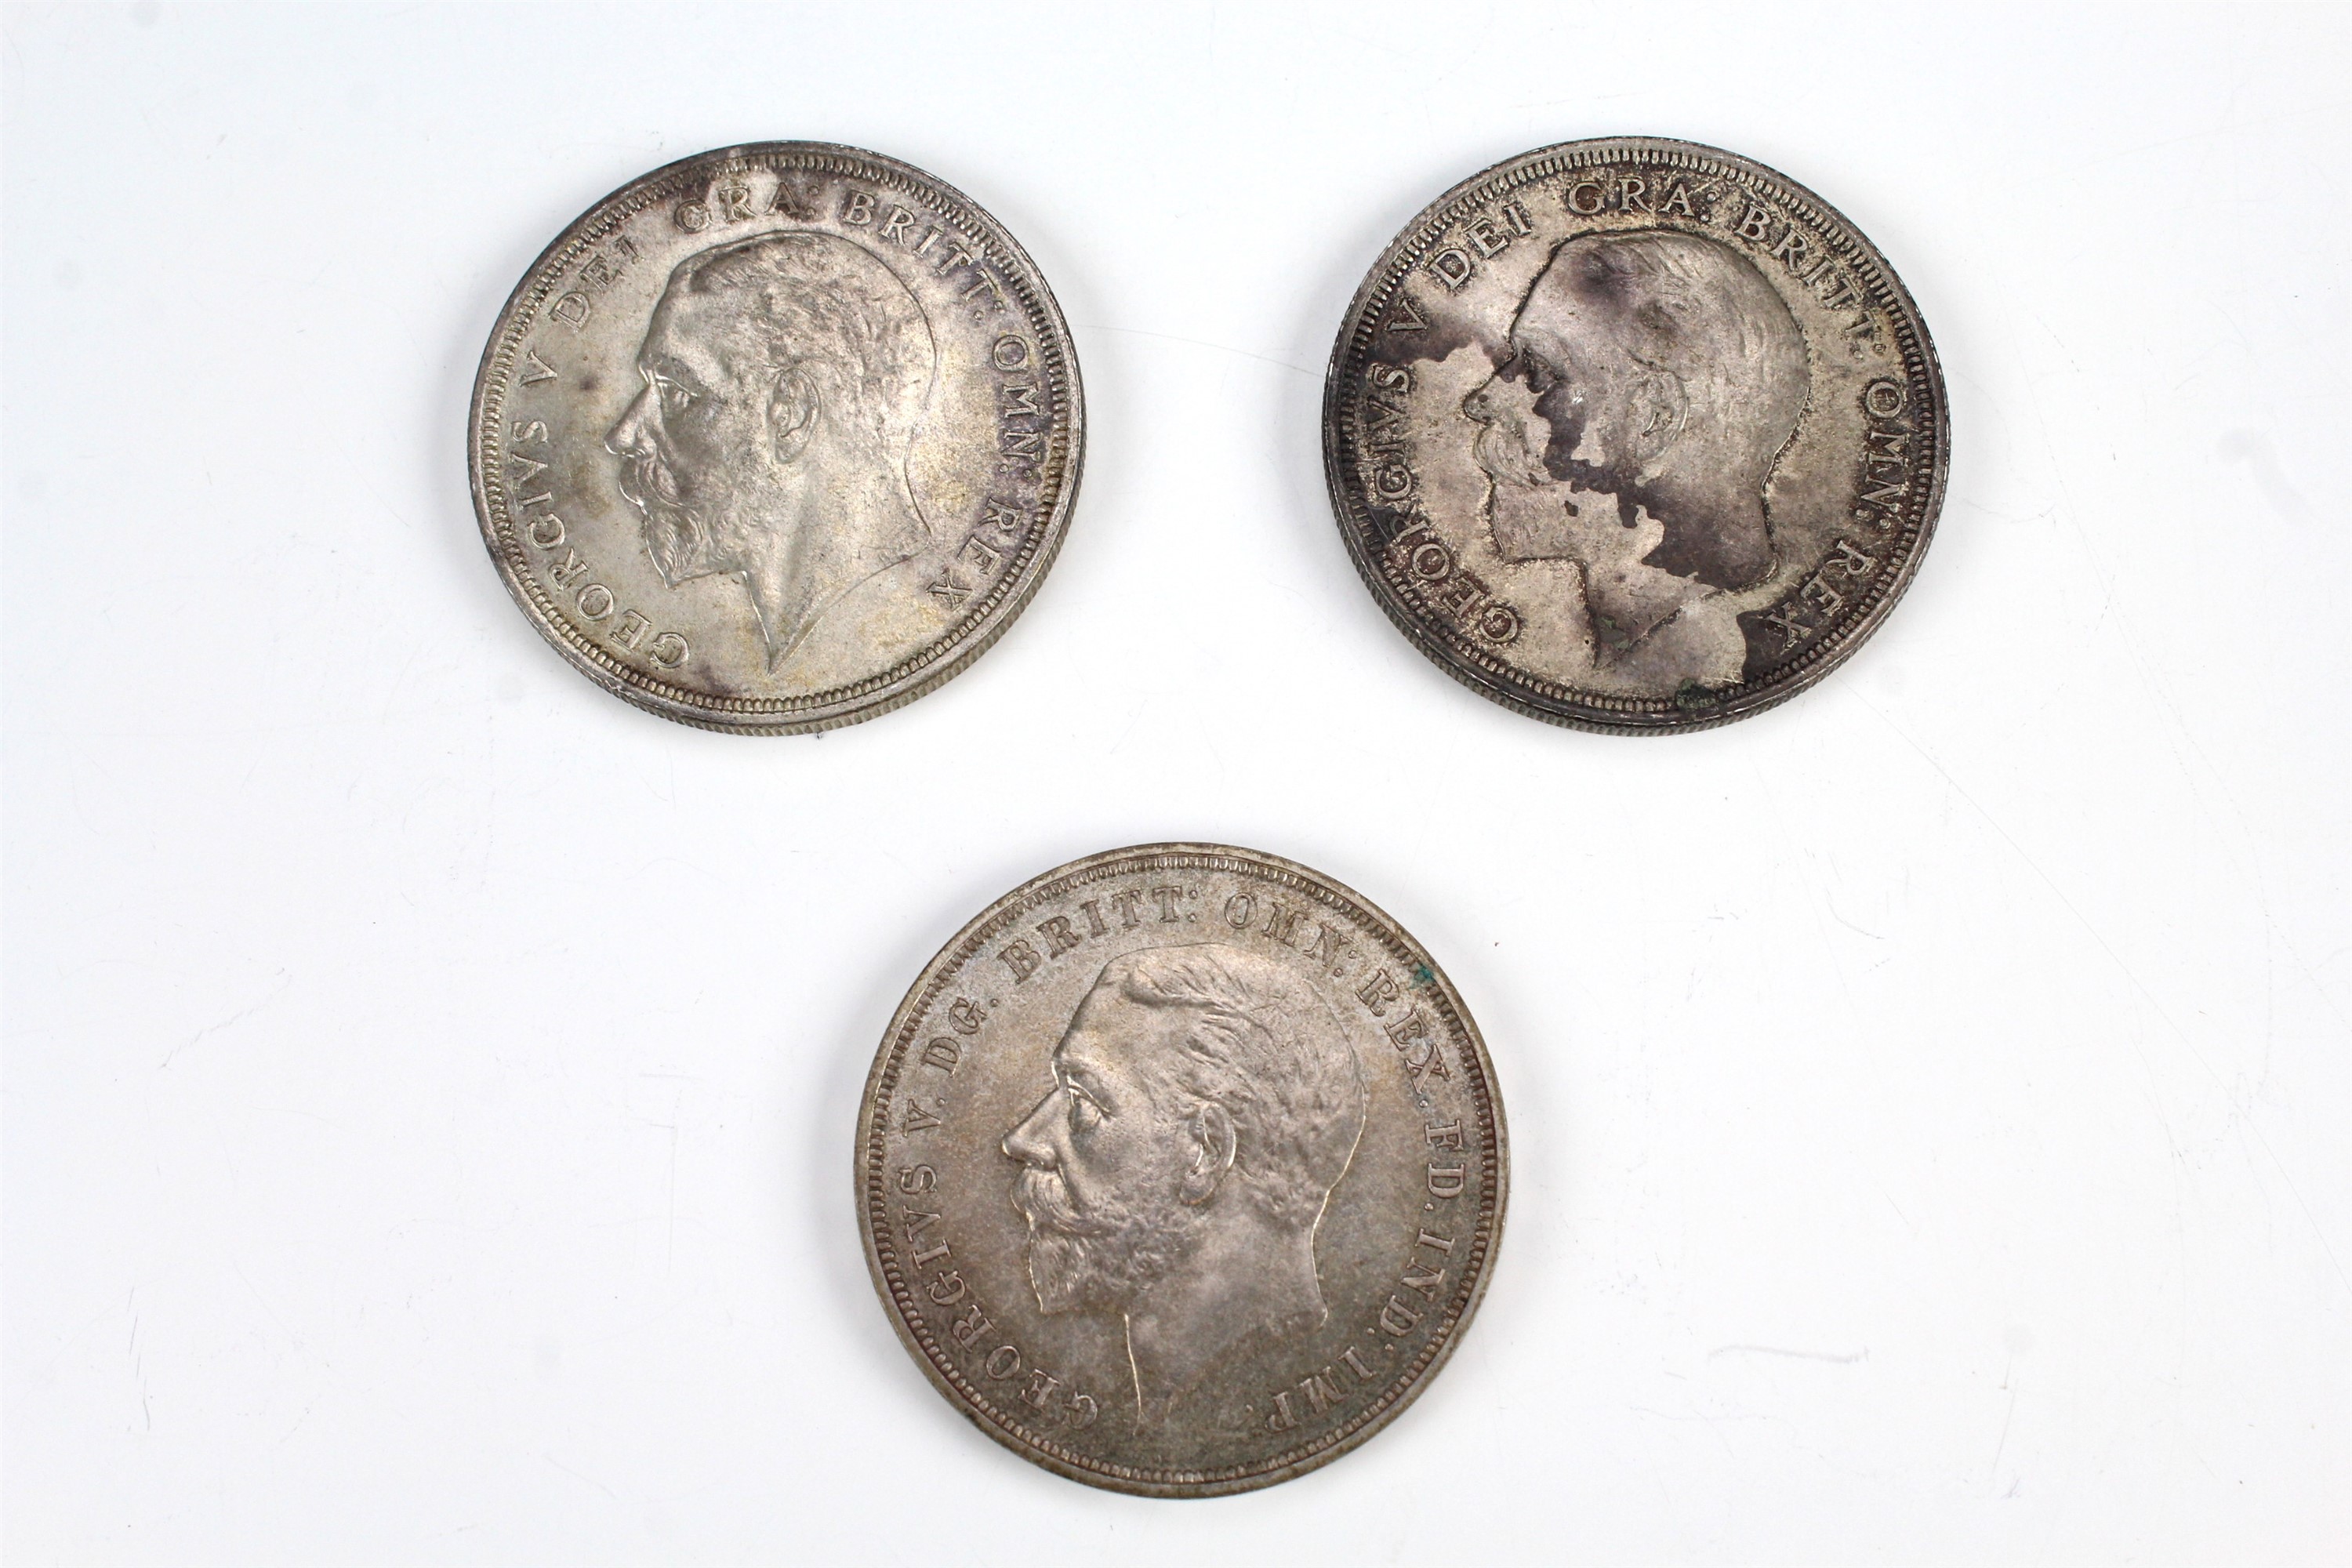 Two 1928 "wreath" crown coins together with a 1935 crown coin